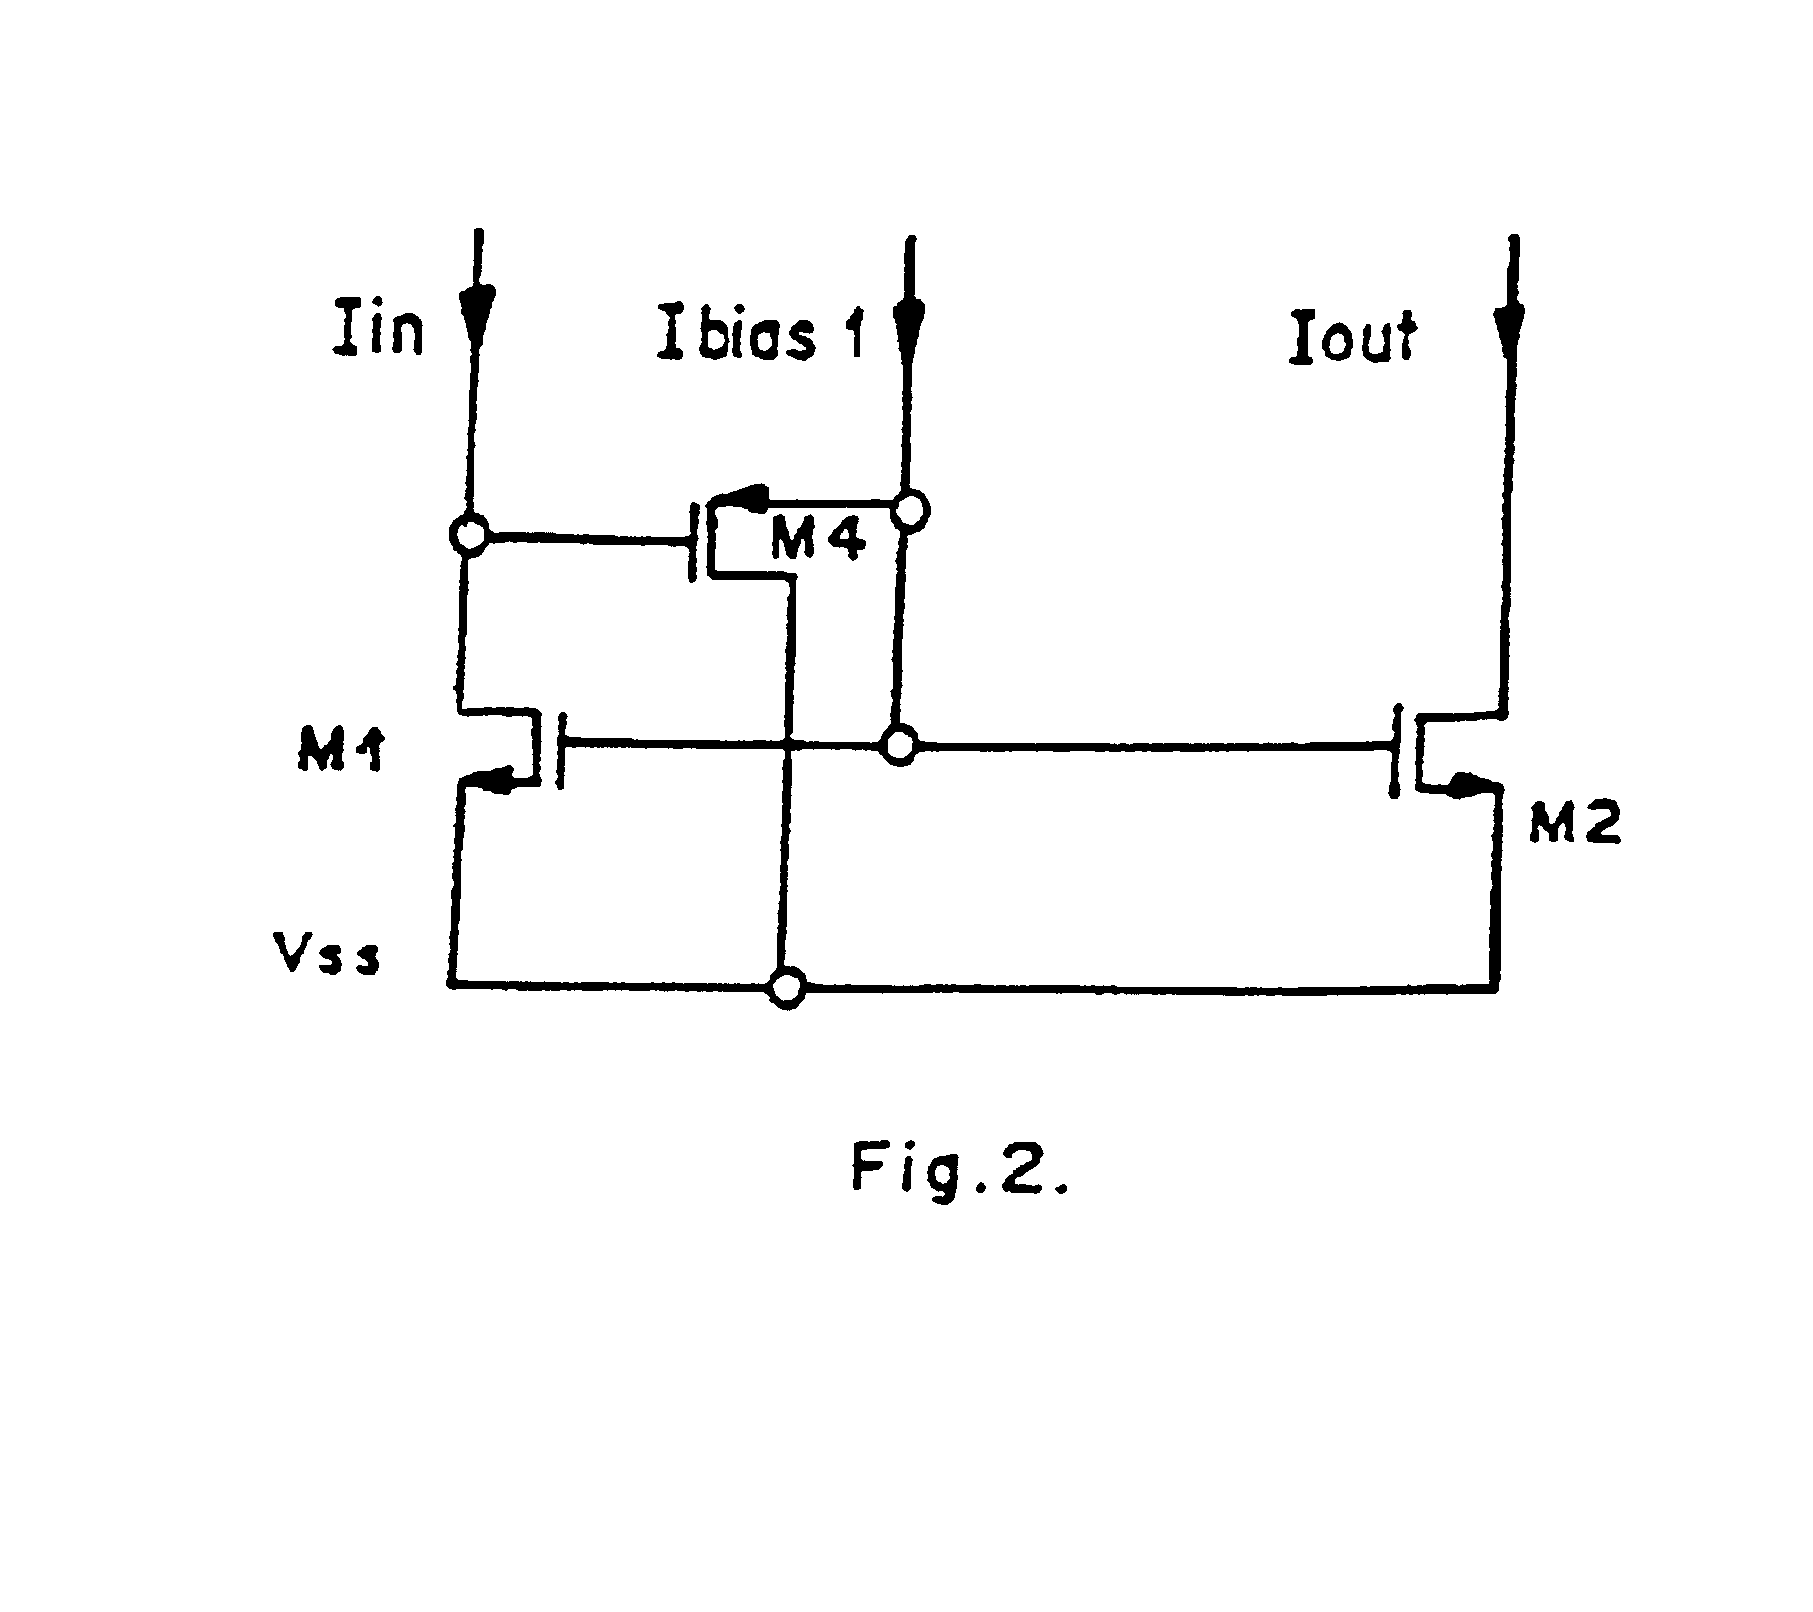 Simulated circuit layout for low voltage, low paper and high performance type II current conveyor